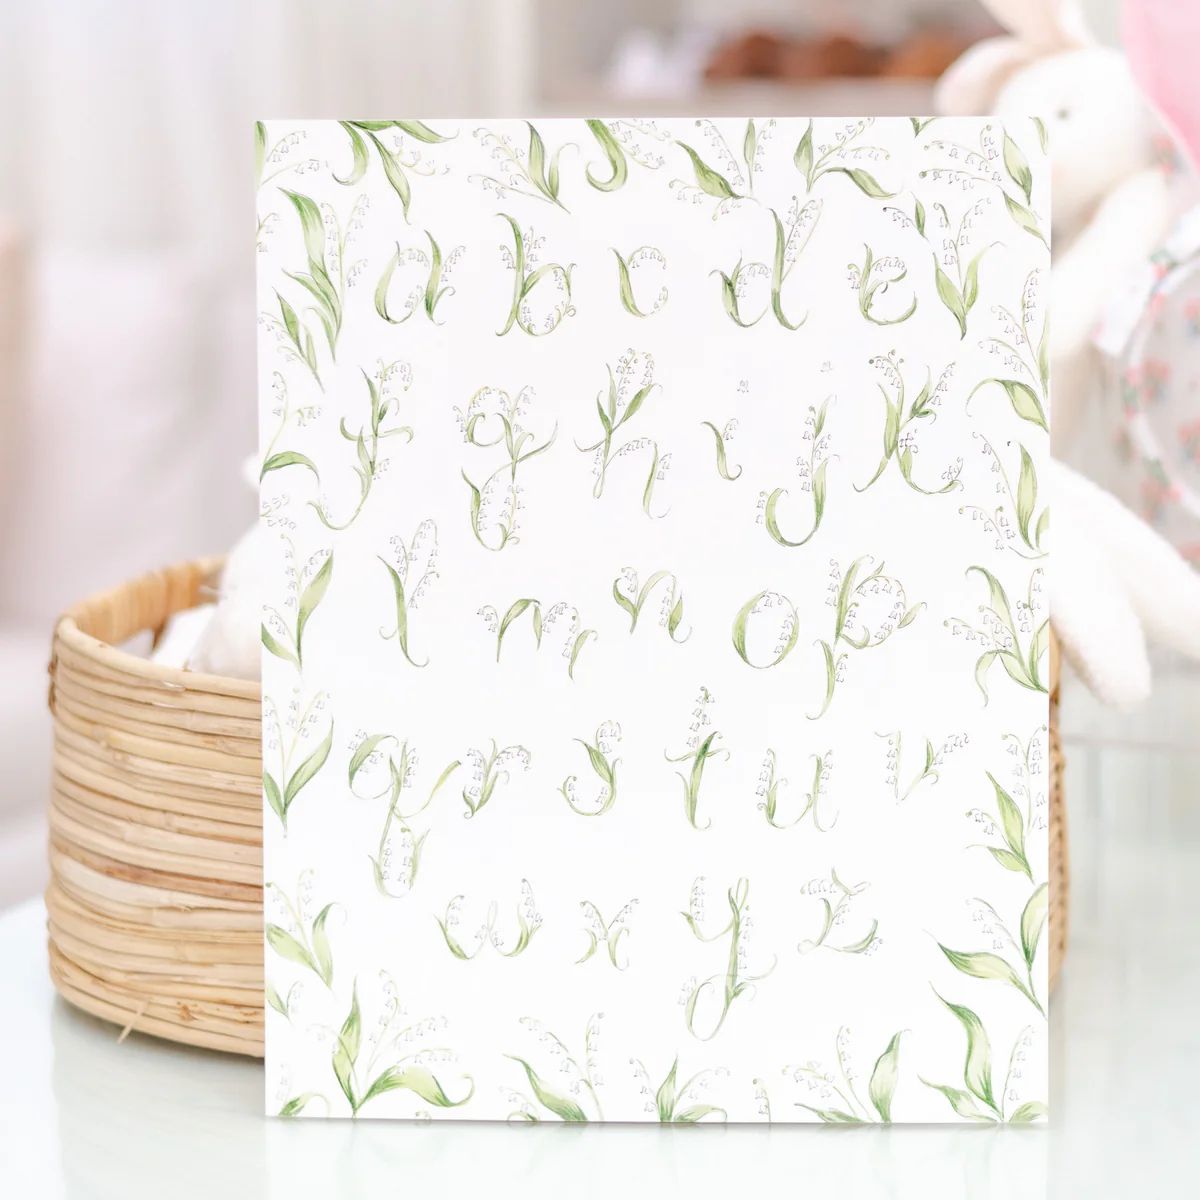 Riley Sheehey® Art Print - Lily of the Valley Alphabet | Dondolo